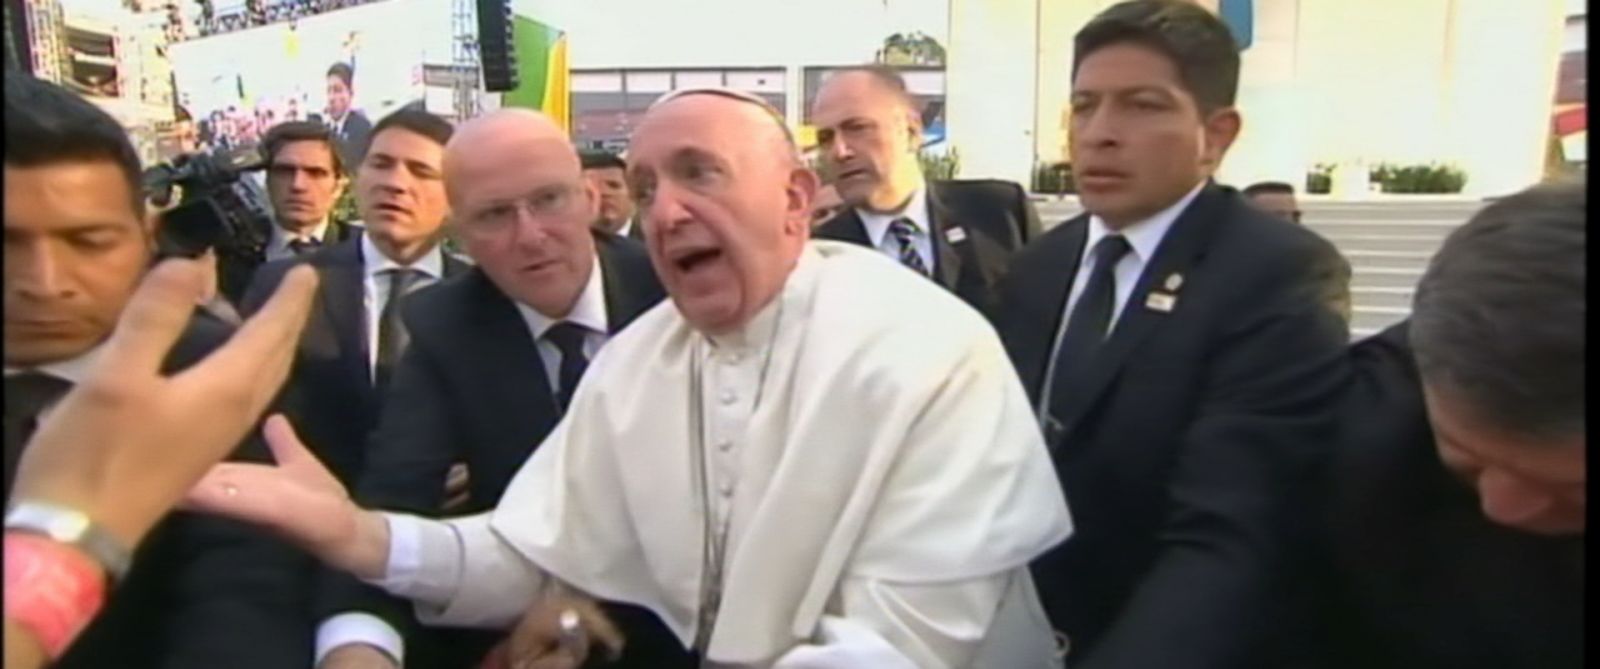 PHOTO: The pontiff almost fell over as crowds tugged on his sleeve during a stop in Mexico.